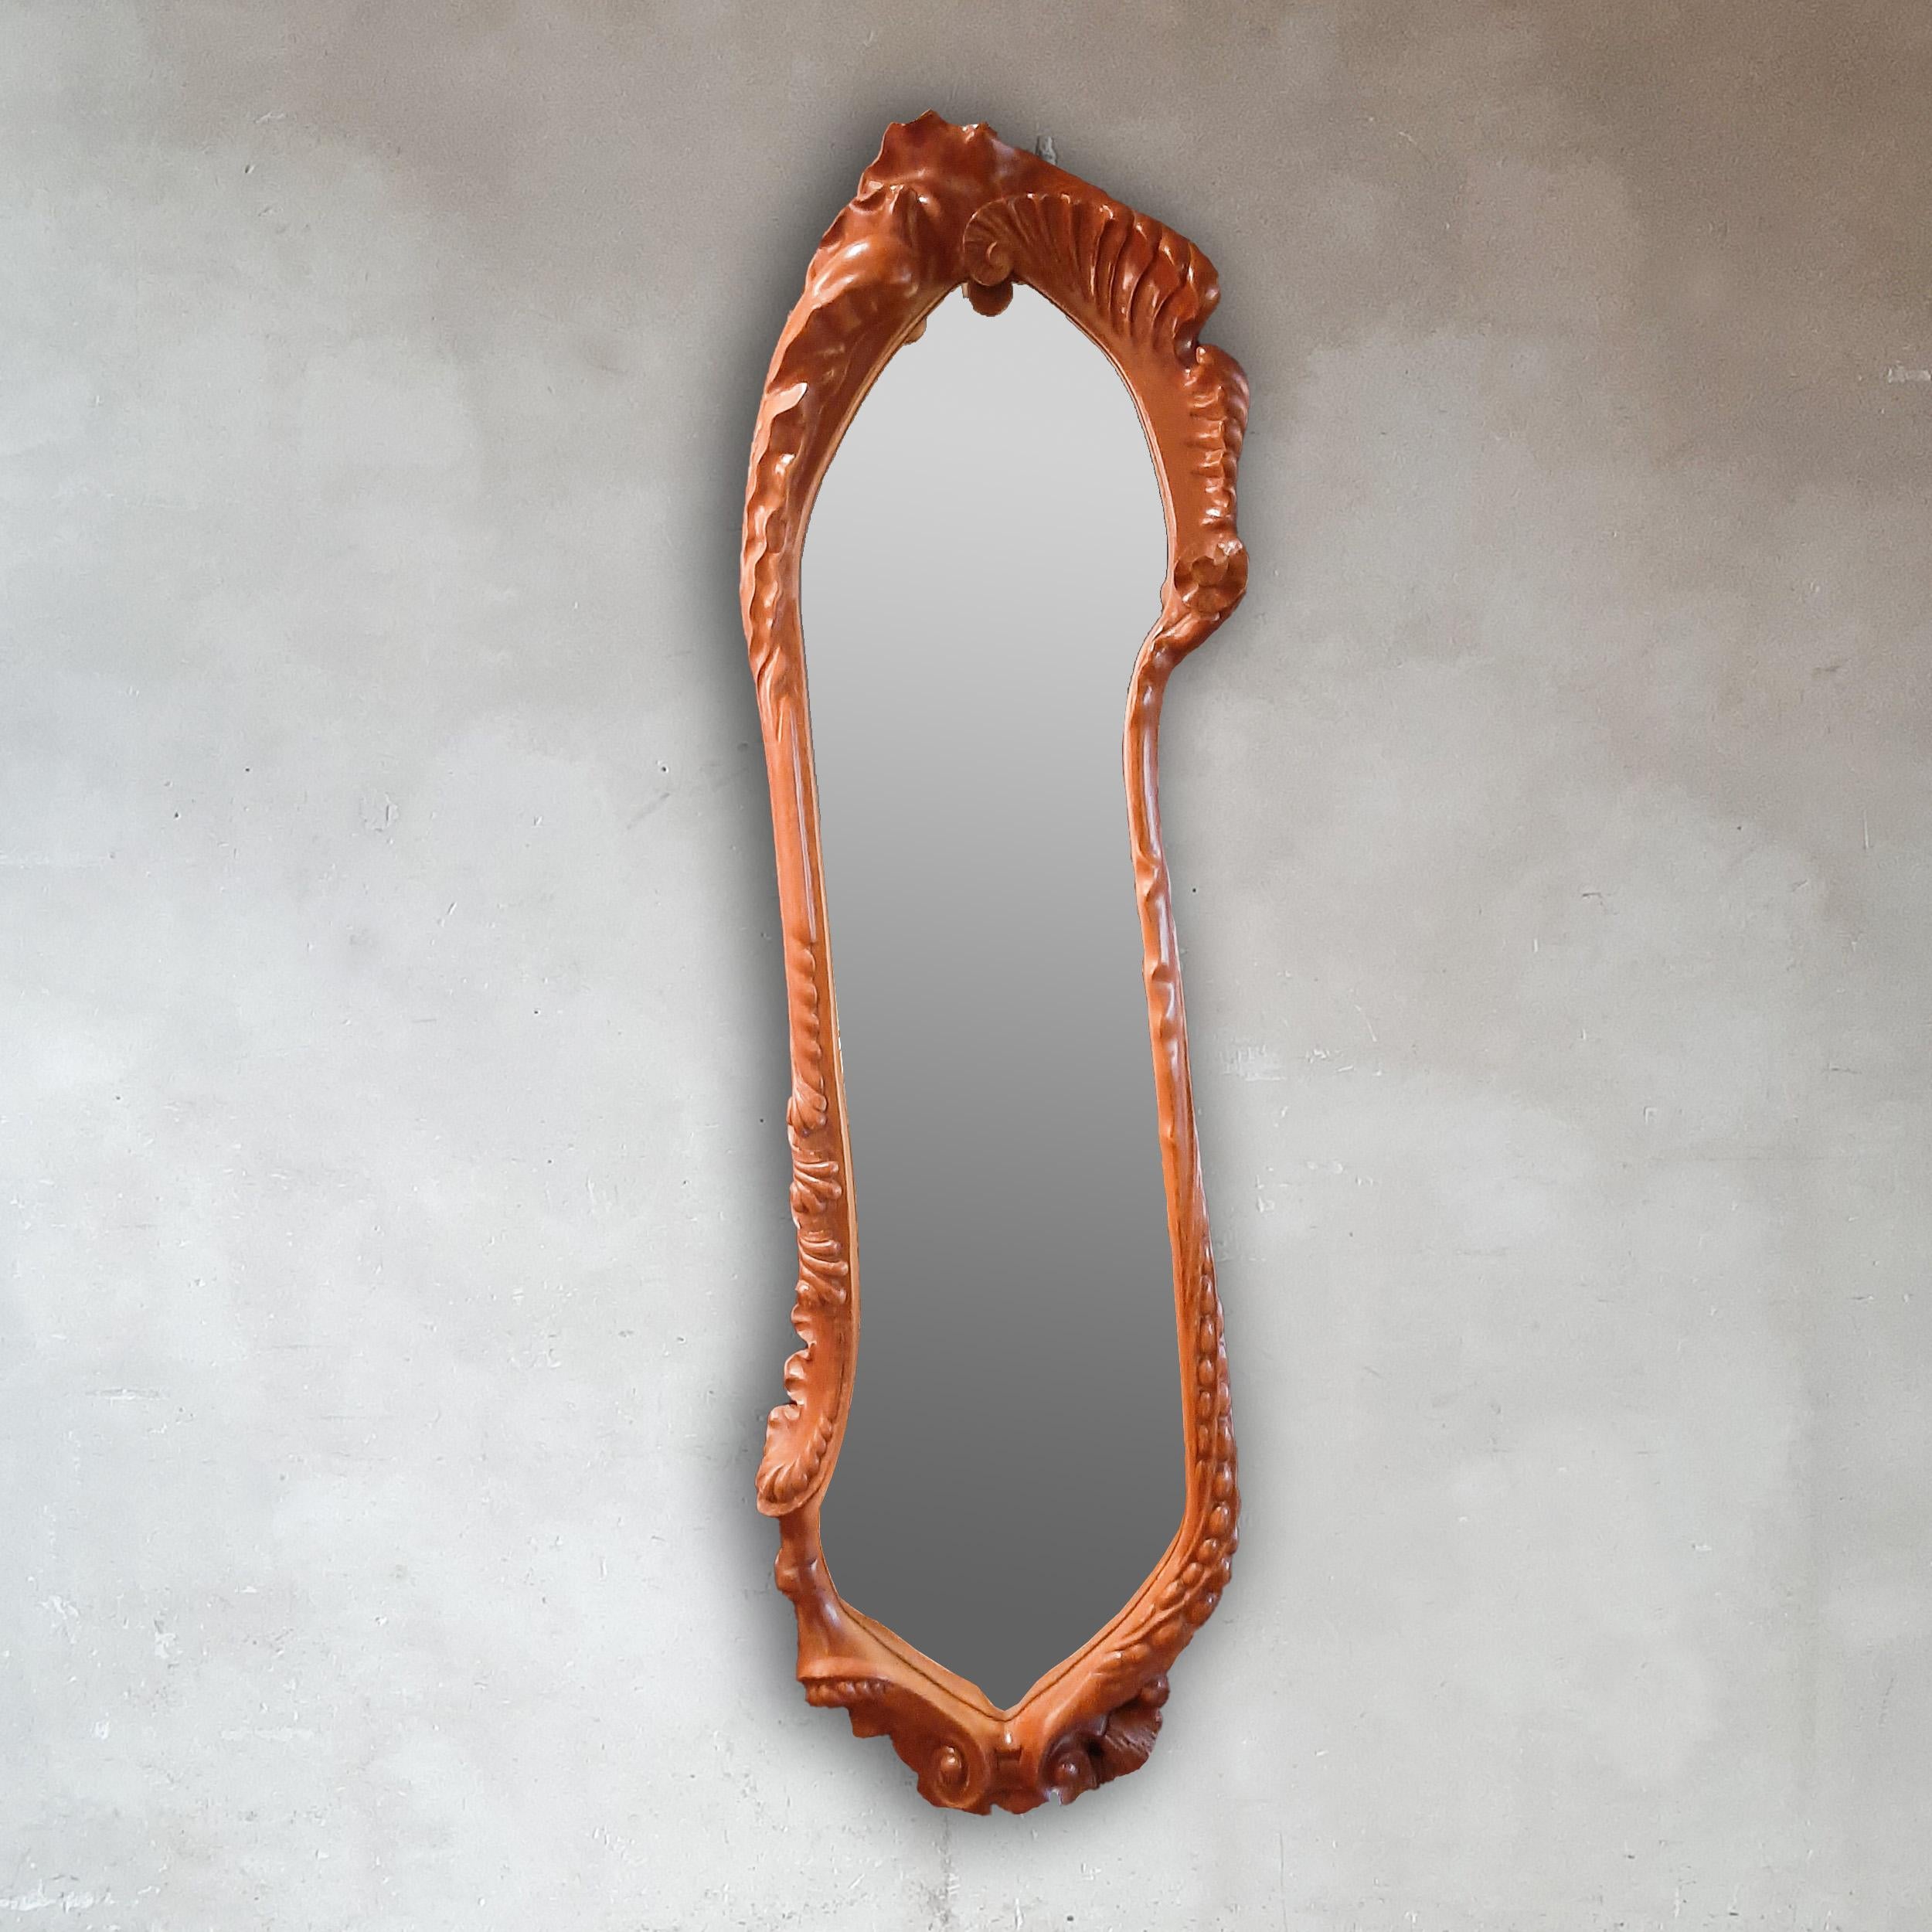 Calvet mirror in wood designed by Antoni Gaudí for BD Barcelona. This Art Nouveau style mirror was designed by Gaudí in the period 1890-1919 and was produced in the late 1990s by the Spanish company BD Barcelona. The frame is made of handcut brown